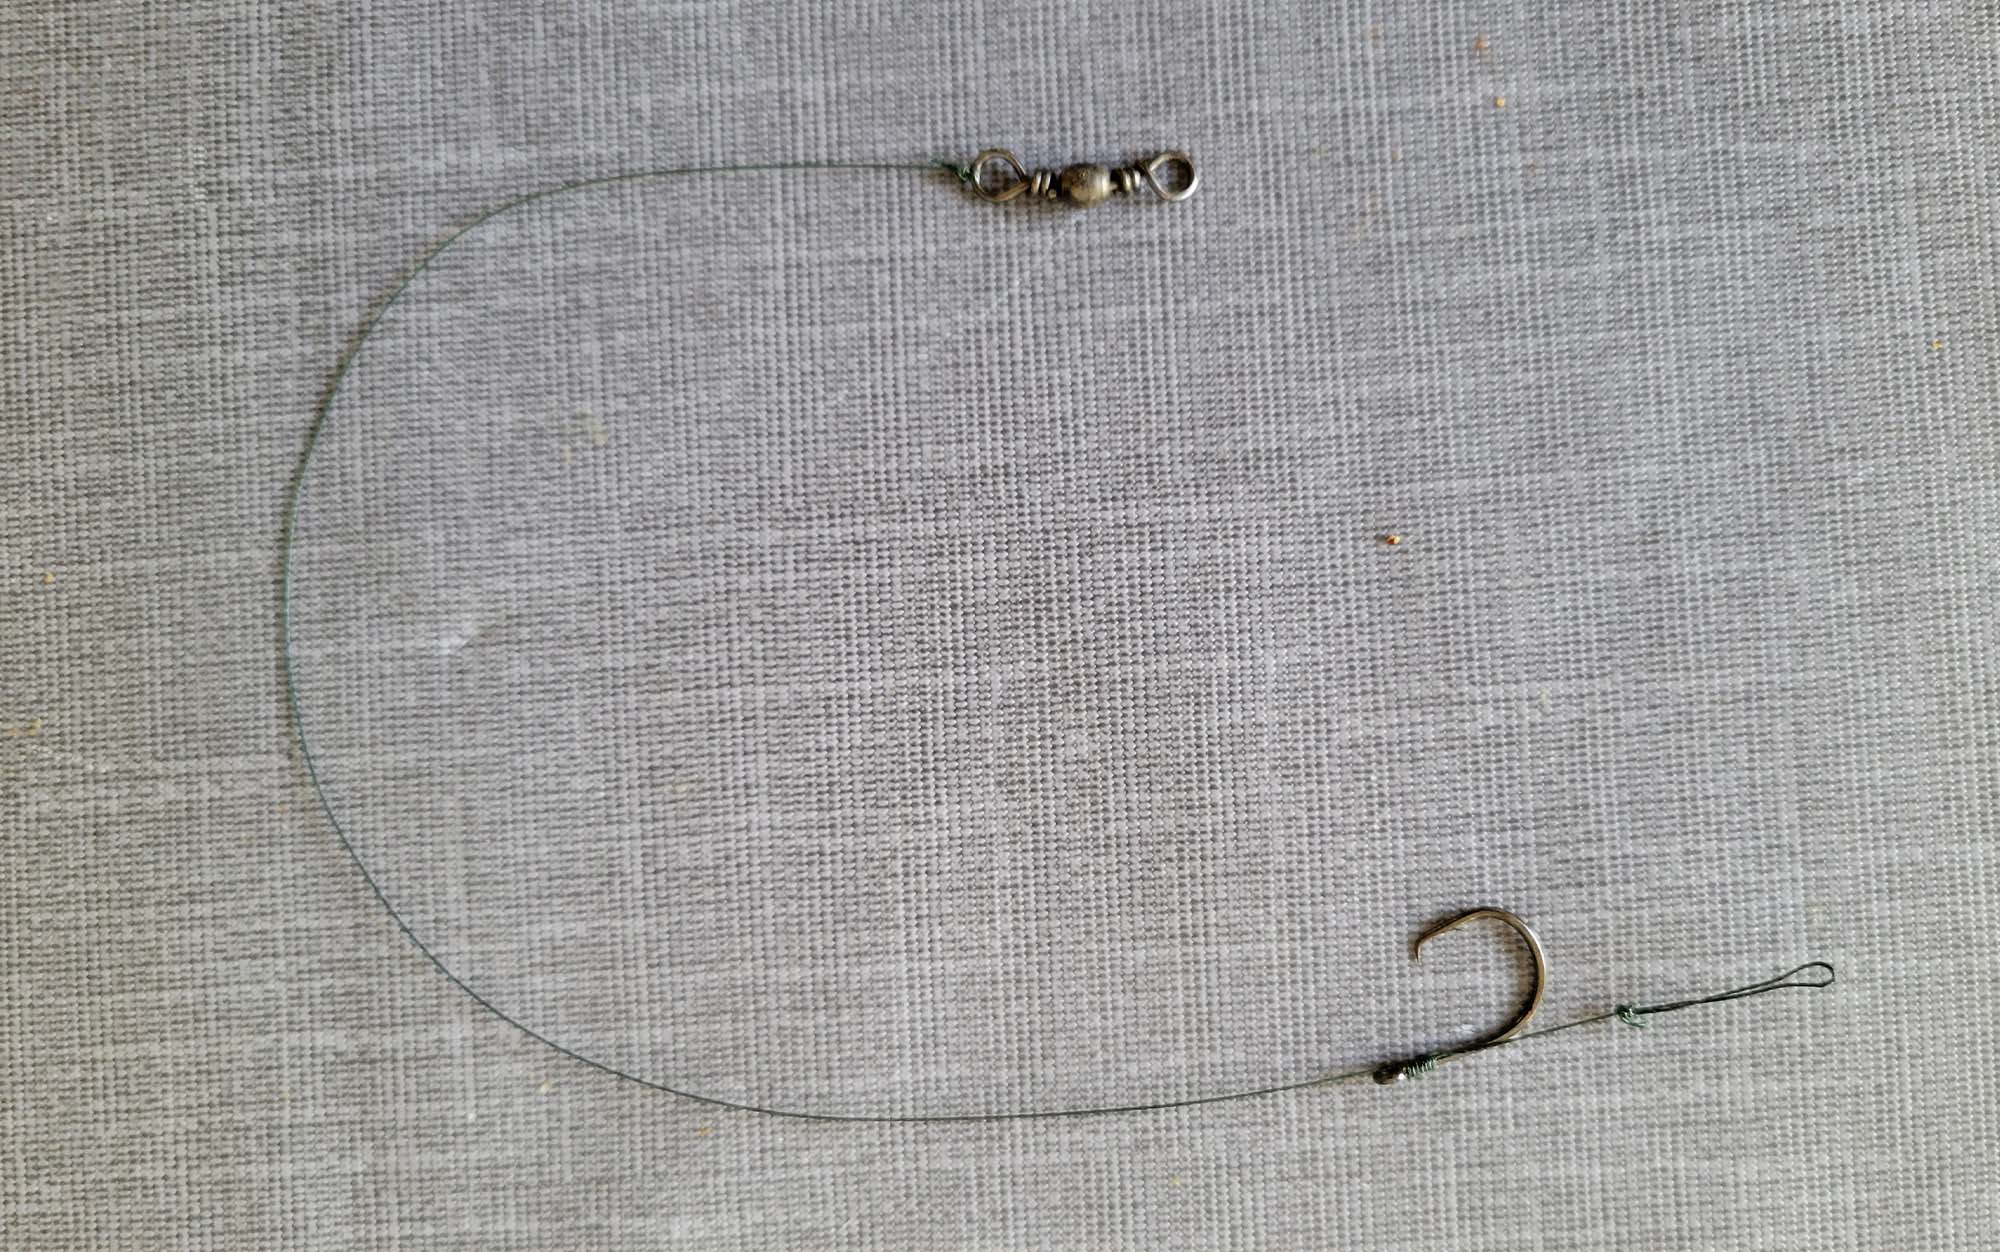 The hair rig is critical to fooling them long enough for the hook to find purchase in the fishâs rubbery mouth.